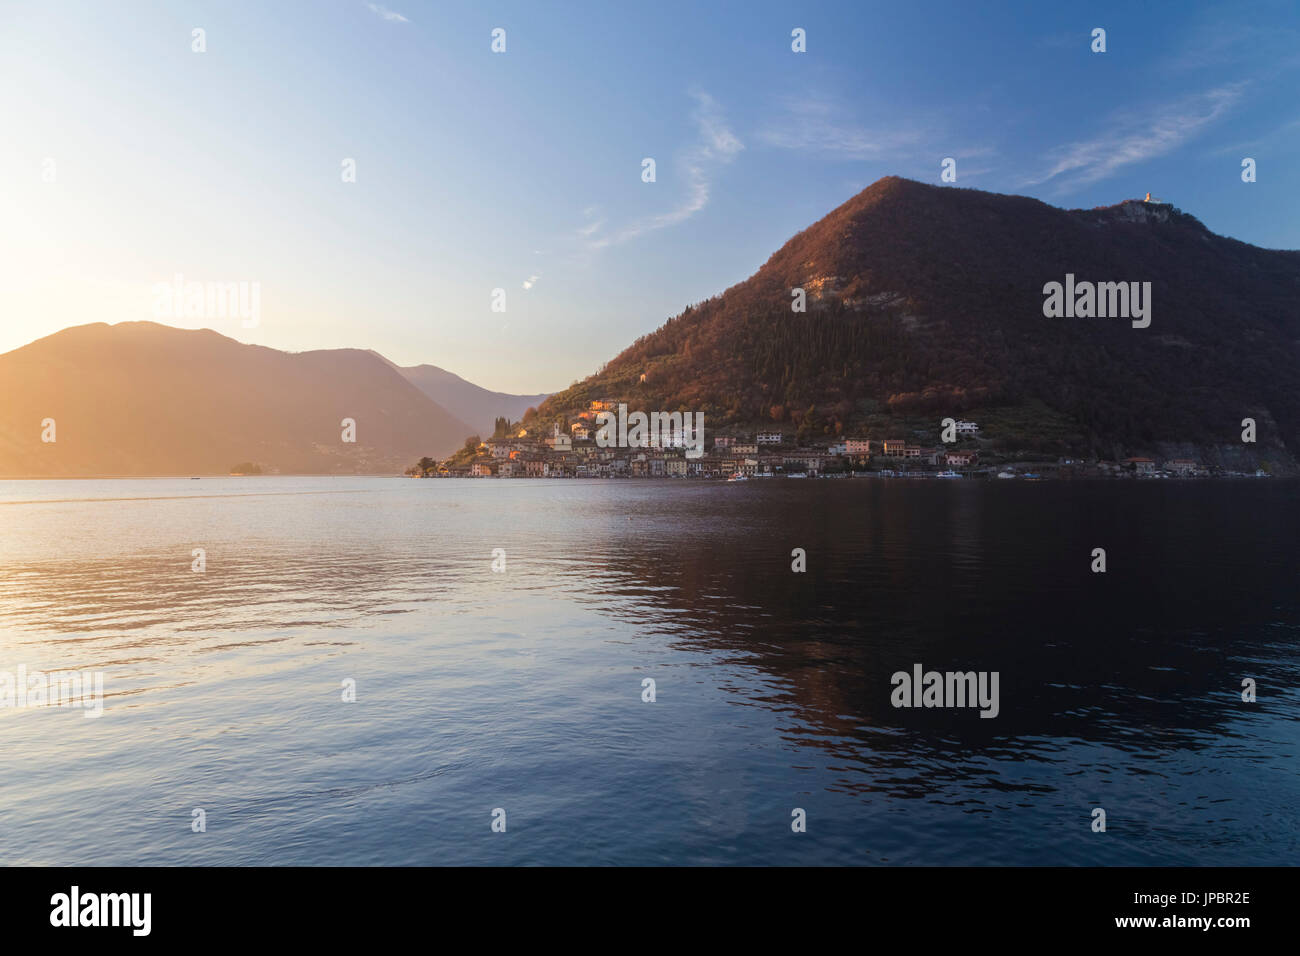 Monte Isola reflection on Lake Iseo during a winter sunset, Brescia Province, Iseo Lake, Lombardy, Italy. Stock Photo